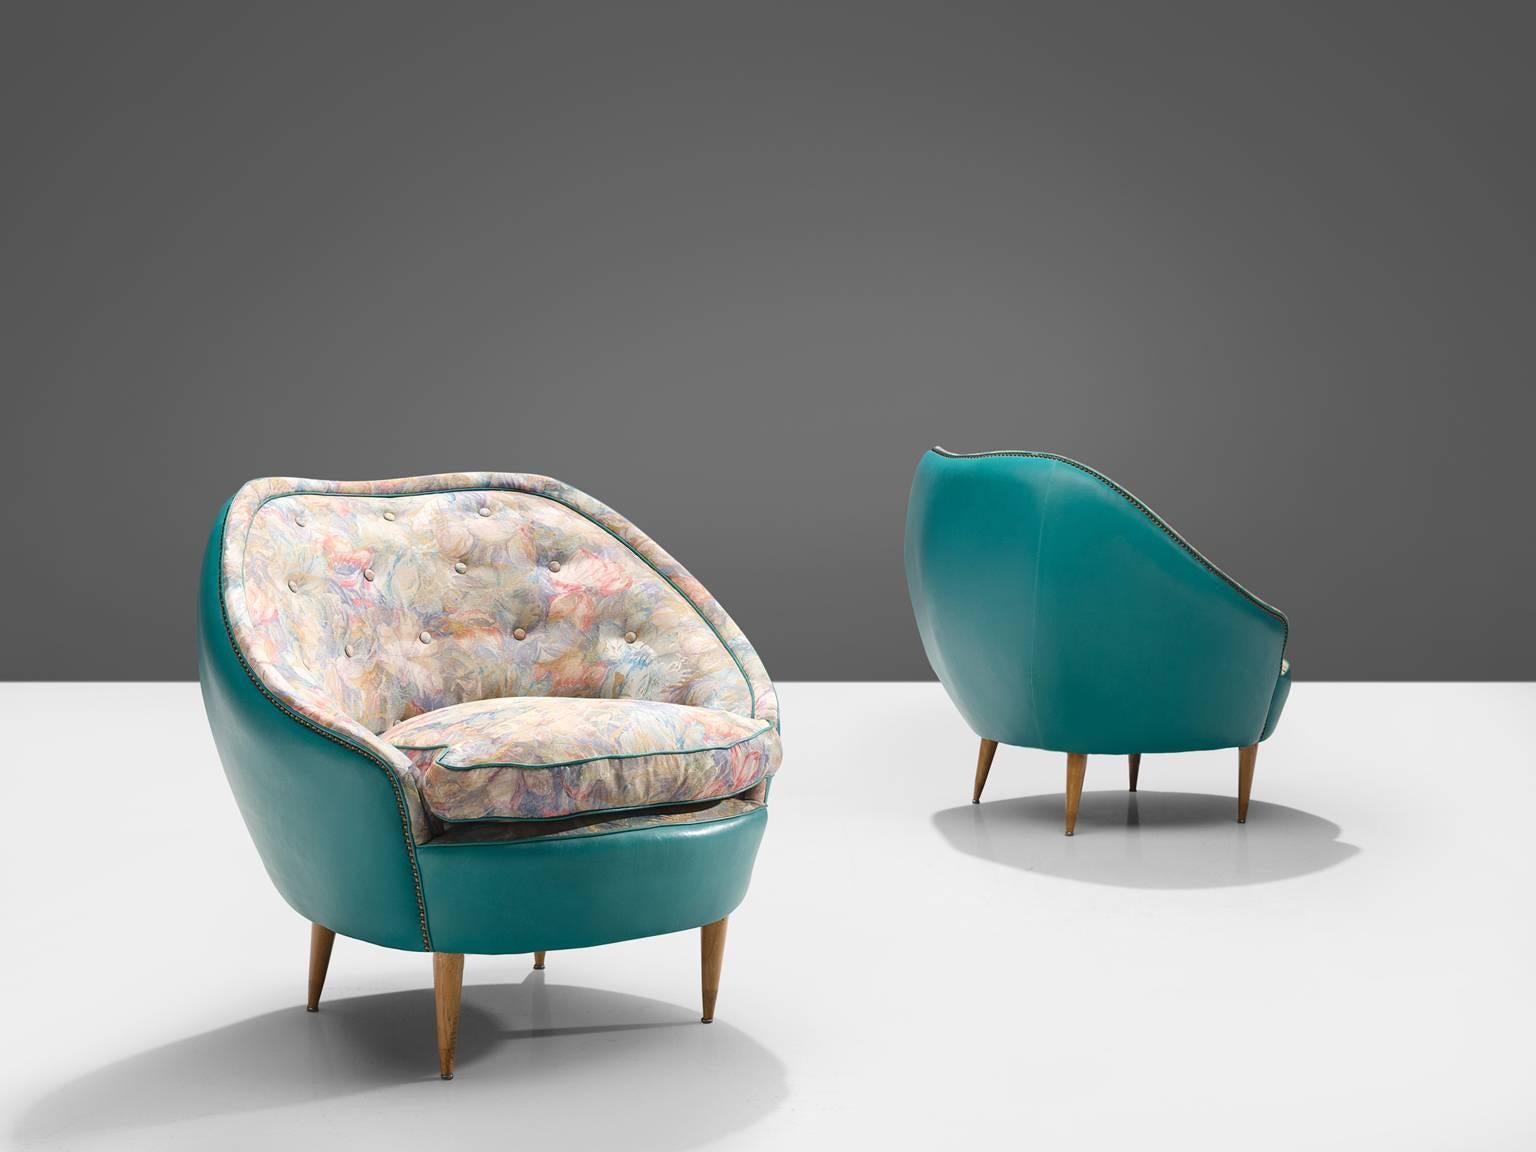 Lounge chairs, turquoise leatherette, fabric, wood, Italy, 1950s.

These club chairs show traits of the design by the Italian designer Veronesi. They are elegant yet bulky and are completely rounded when seen from behind. The chairs feature a